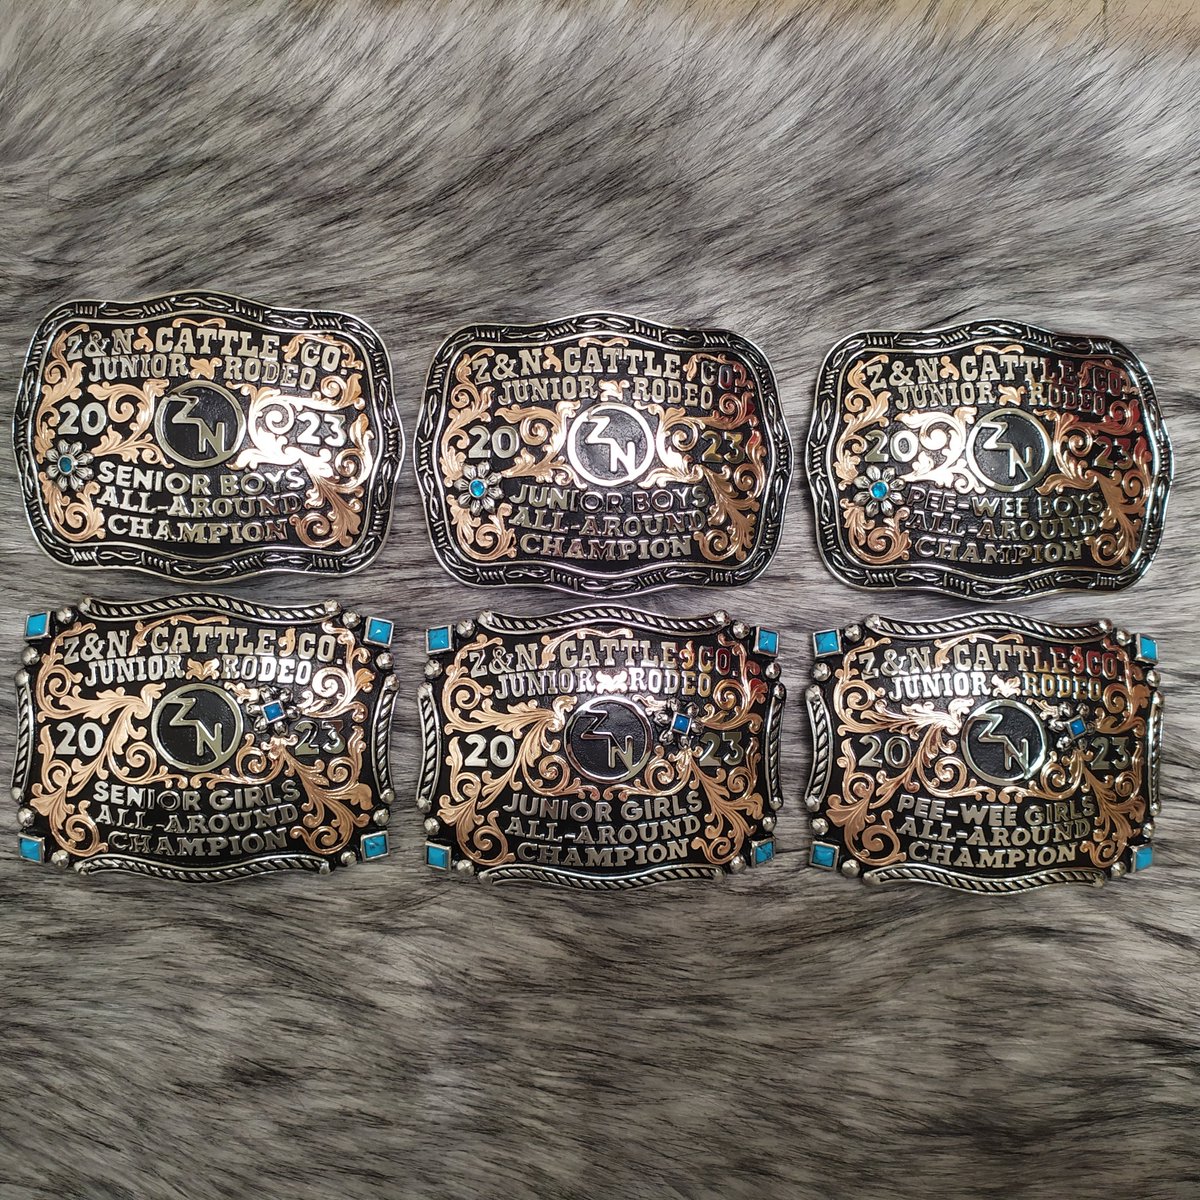 Top is blue & Bottom is turquoise🤩🤩
#punchy #punchybuckles #buckles #bucklesforawards #customized #rodeo #westernlife #championshows #cowboy #cowgirl